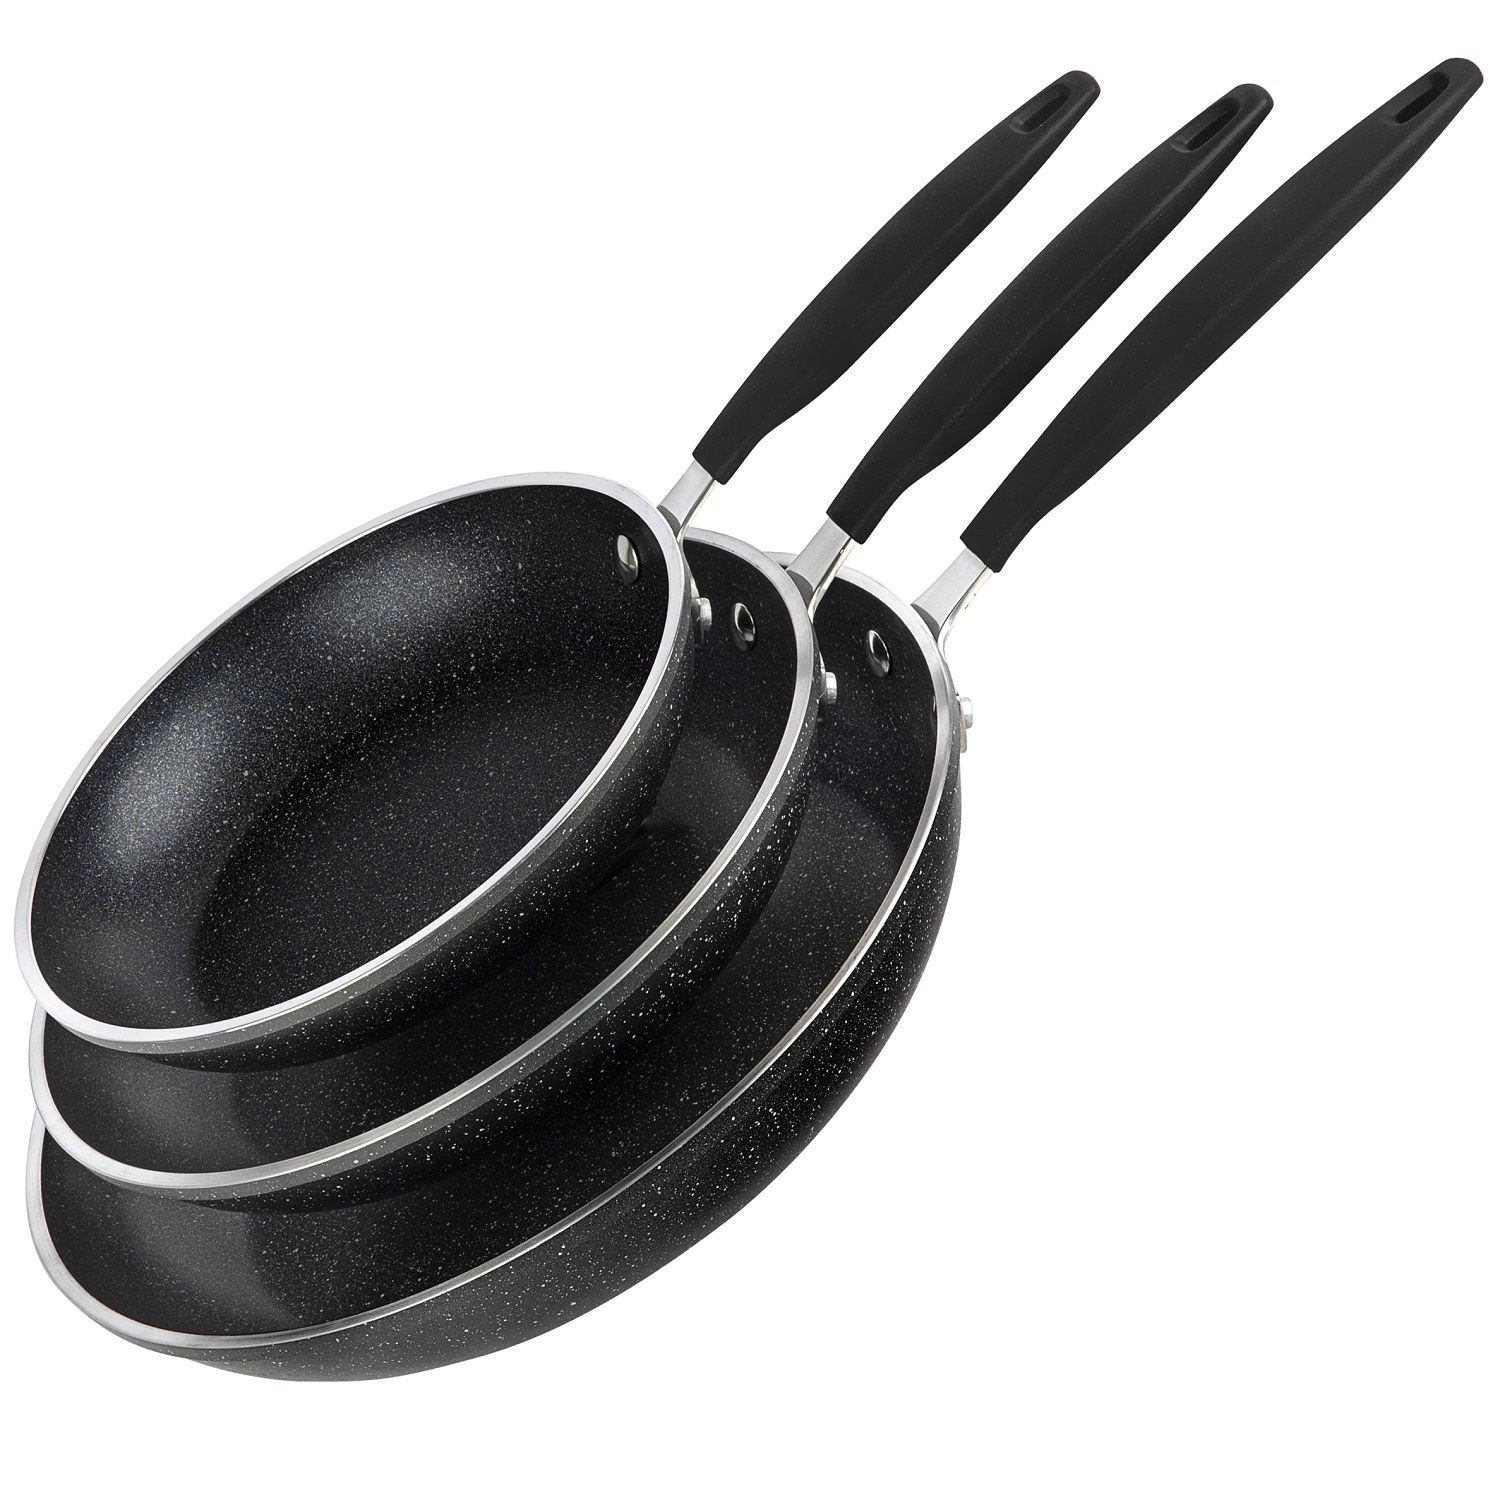 Wolfgang Puck 3-Piece Stainless Steel Skillet Set, Scratch-Resistant  Non-Stick Coating, Includes a Large and Small Skillet, Clear Tempered-Glass  Lid